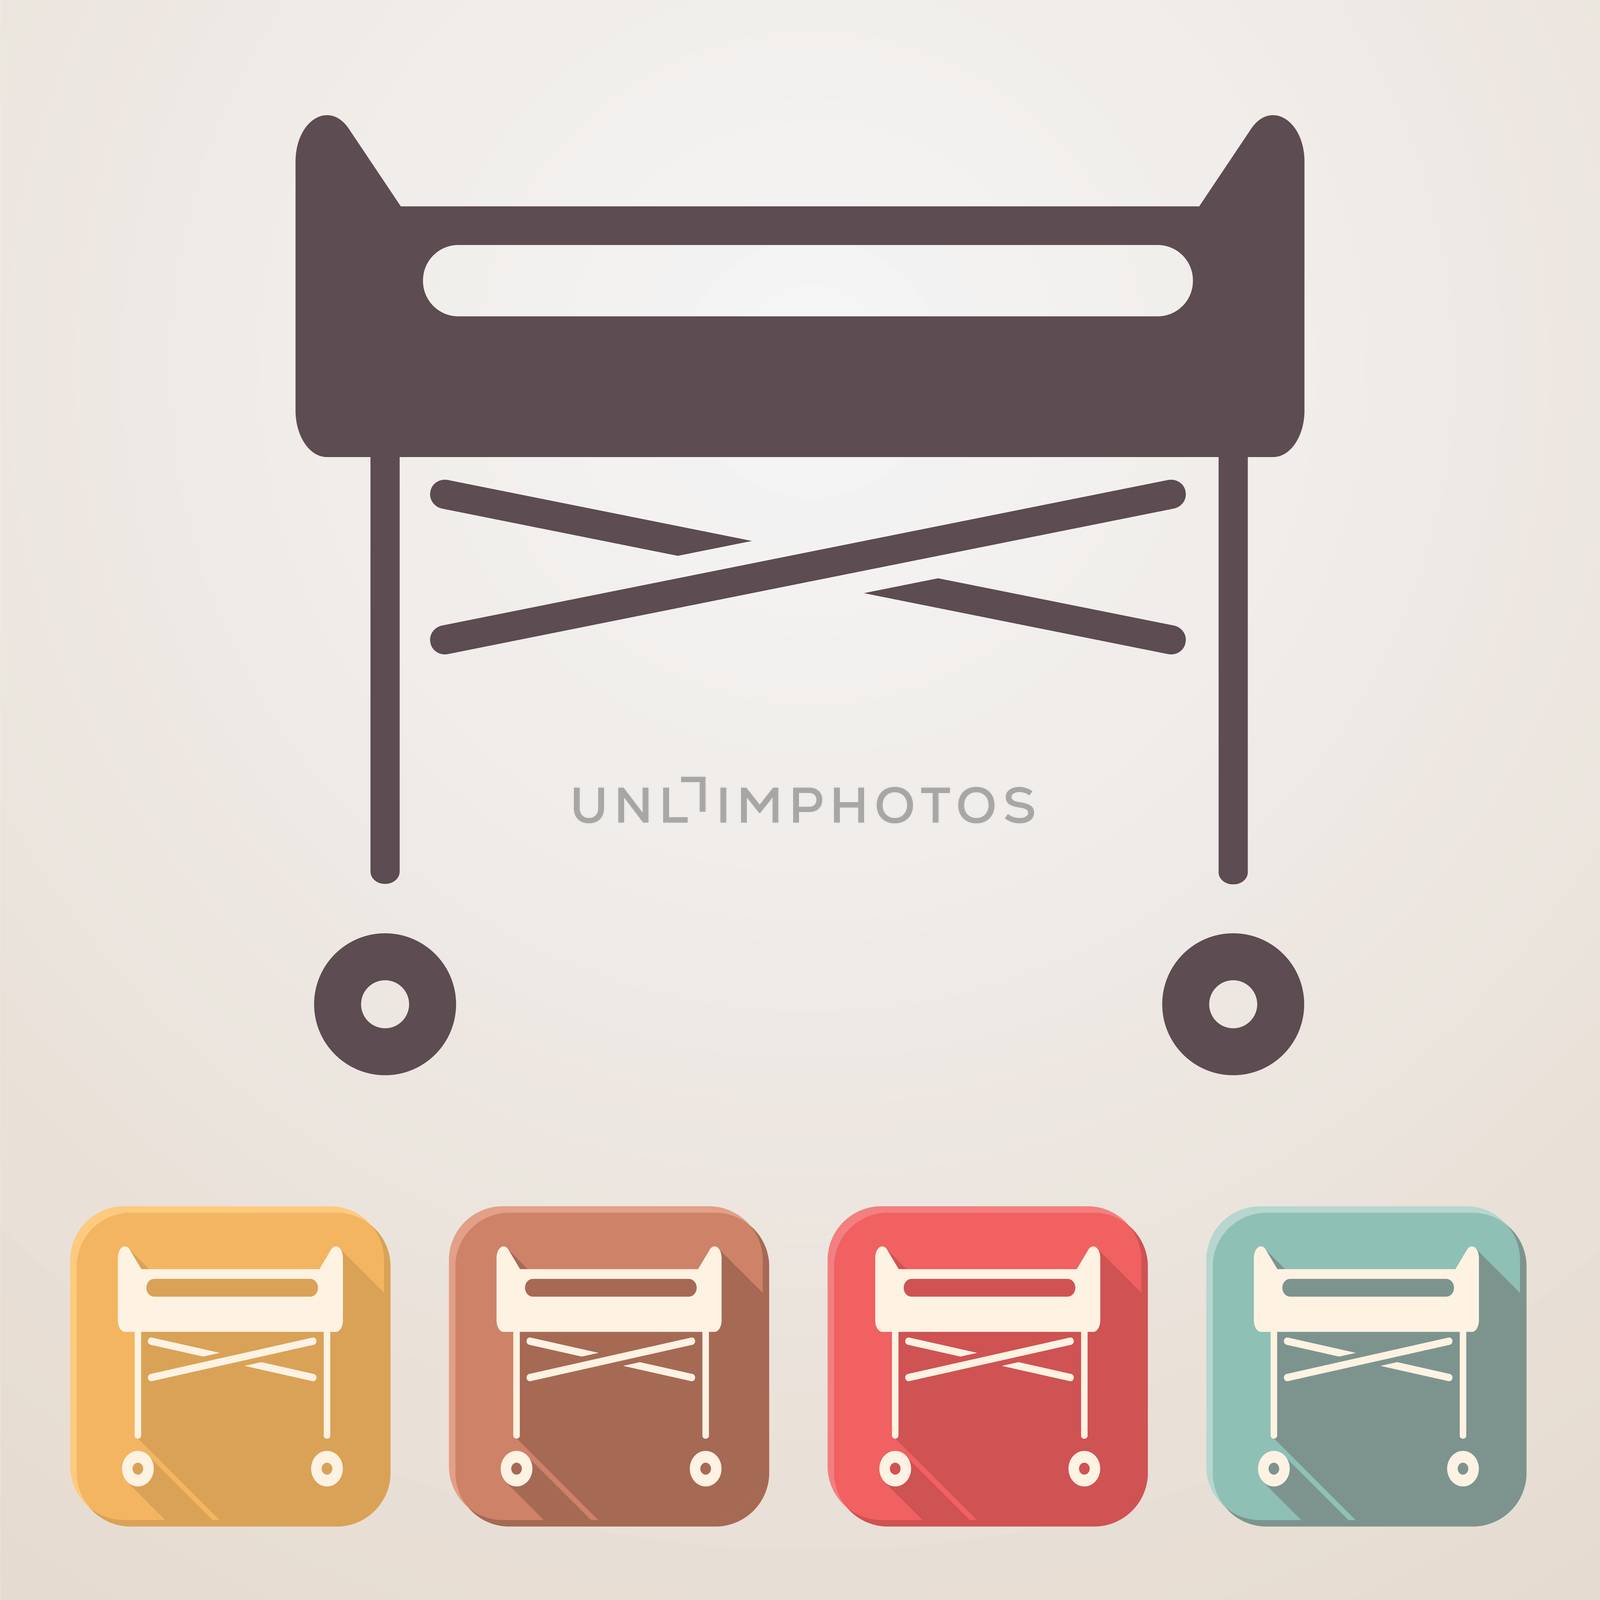 Hospital crib flat icon set in color boxes with shadow by Lemon_workshop